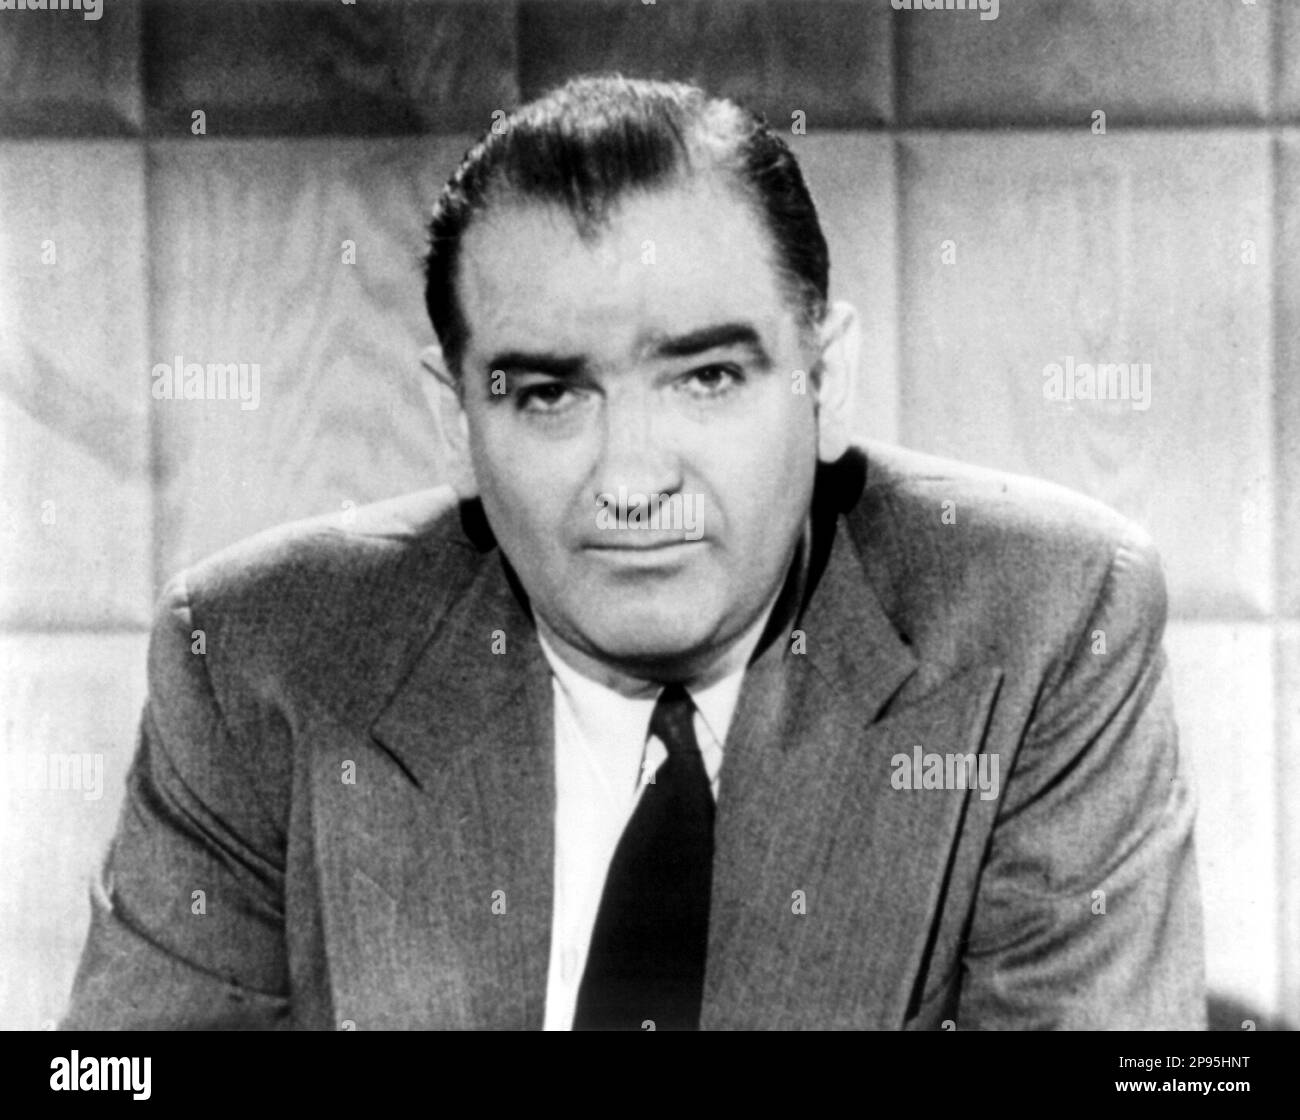 1954 , USA : Senator JOSEPH McCARTHY ( 1908 –  1957 ) was a Republican U.S. Senator from the state of Wisconsin between 1947 and 1957 . Beginning in 1950, McCarthy became the most visible public face of a period of extreme anti-communist suspicion inspired by the tensions of the Cold War. He was noted for making unsubstantiated claims that there were large numbers of Communists and Soviet spies and sympathizers inside the federal government. - McCarthyism - Senatore - MACCARTISMO - USA - ritratto - portrait - cravatta - tie - collar - colletto  - UNITED STATES  - STATI UNITI  - GUERRA FREDDA Stock Photo